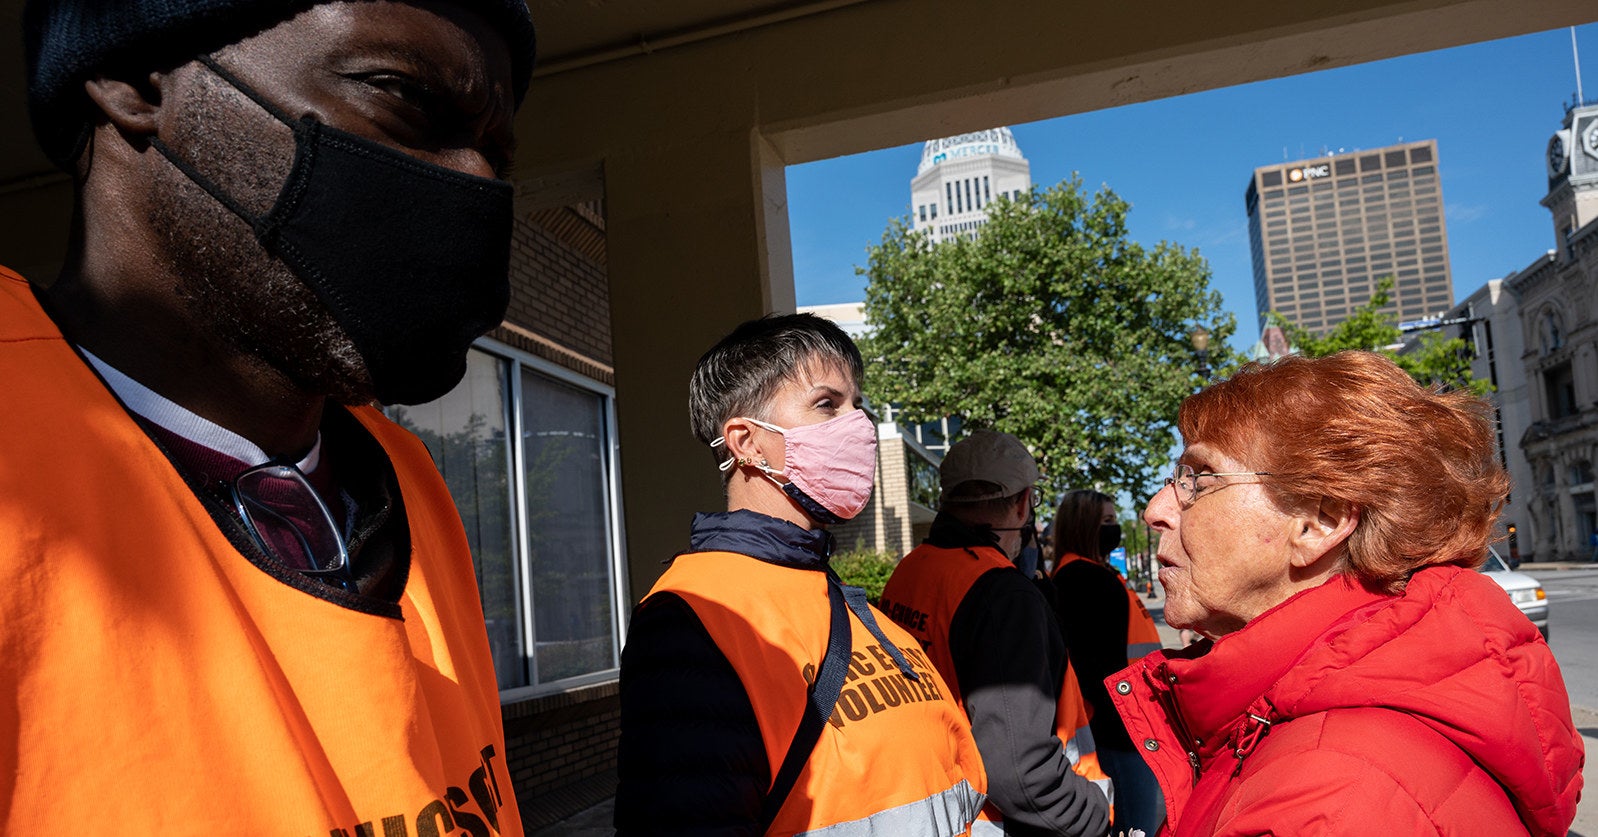 Abortion Clinic Escorts Say Protesters Are Feeling Emboldened: “I’m Fighting For..